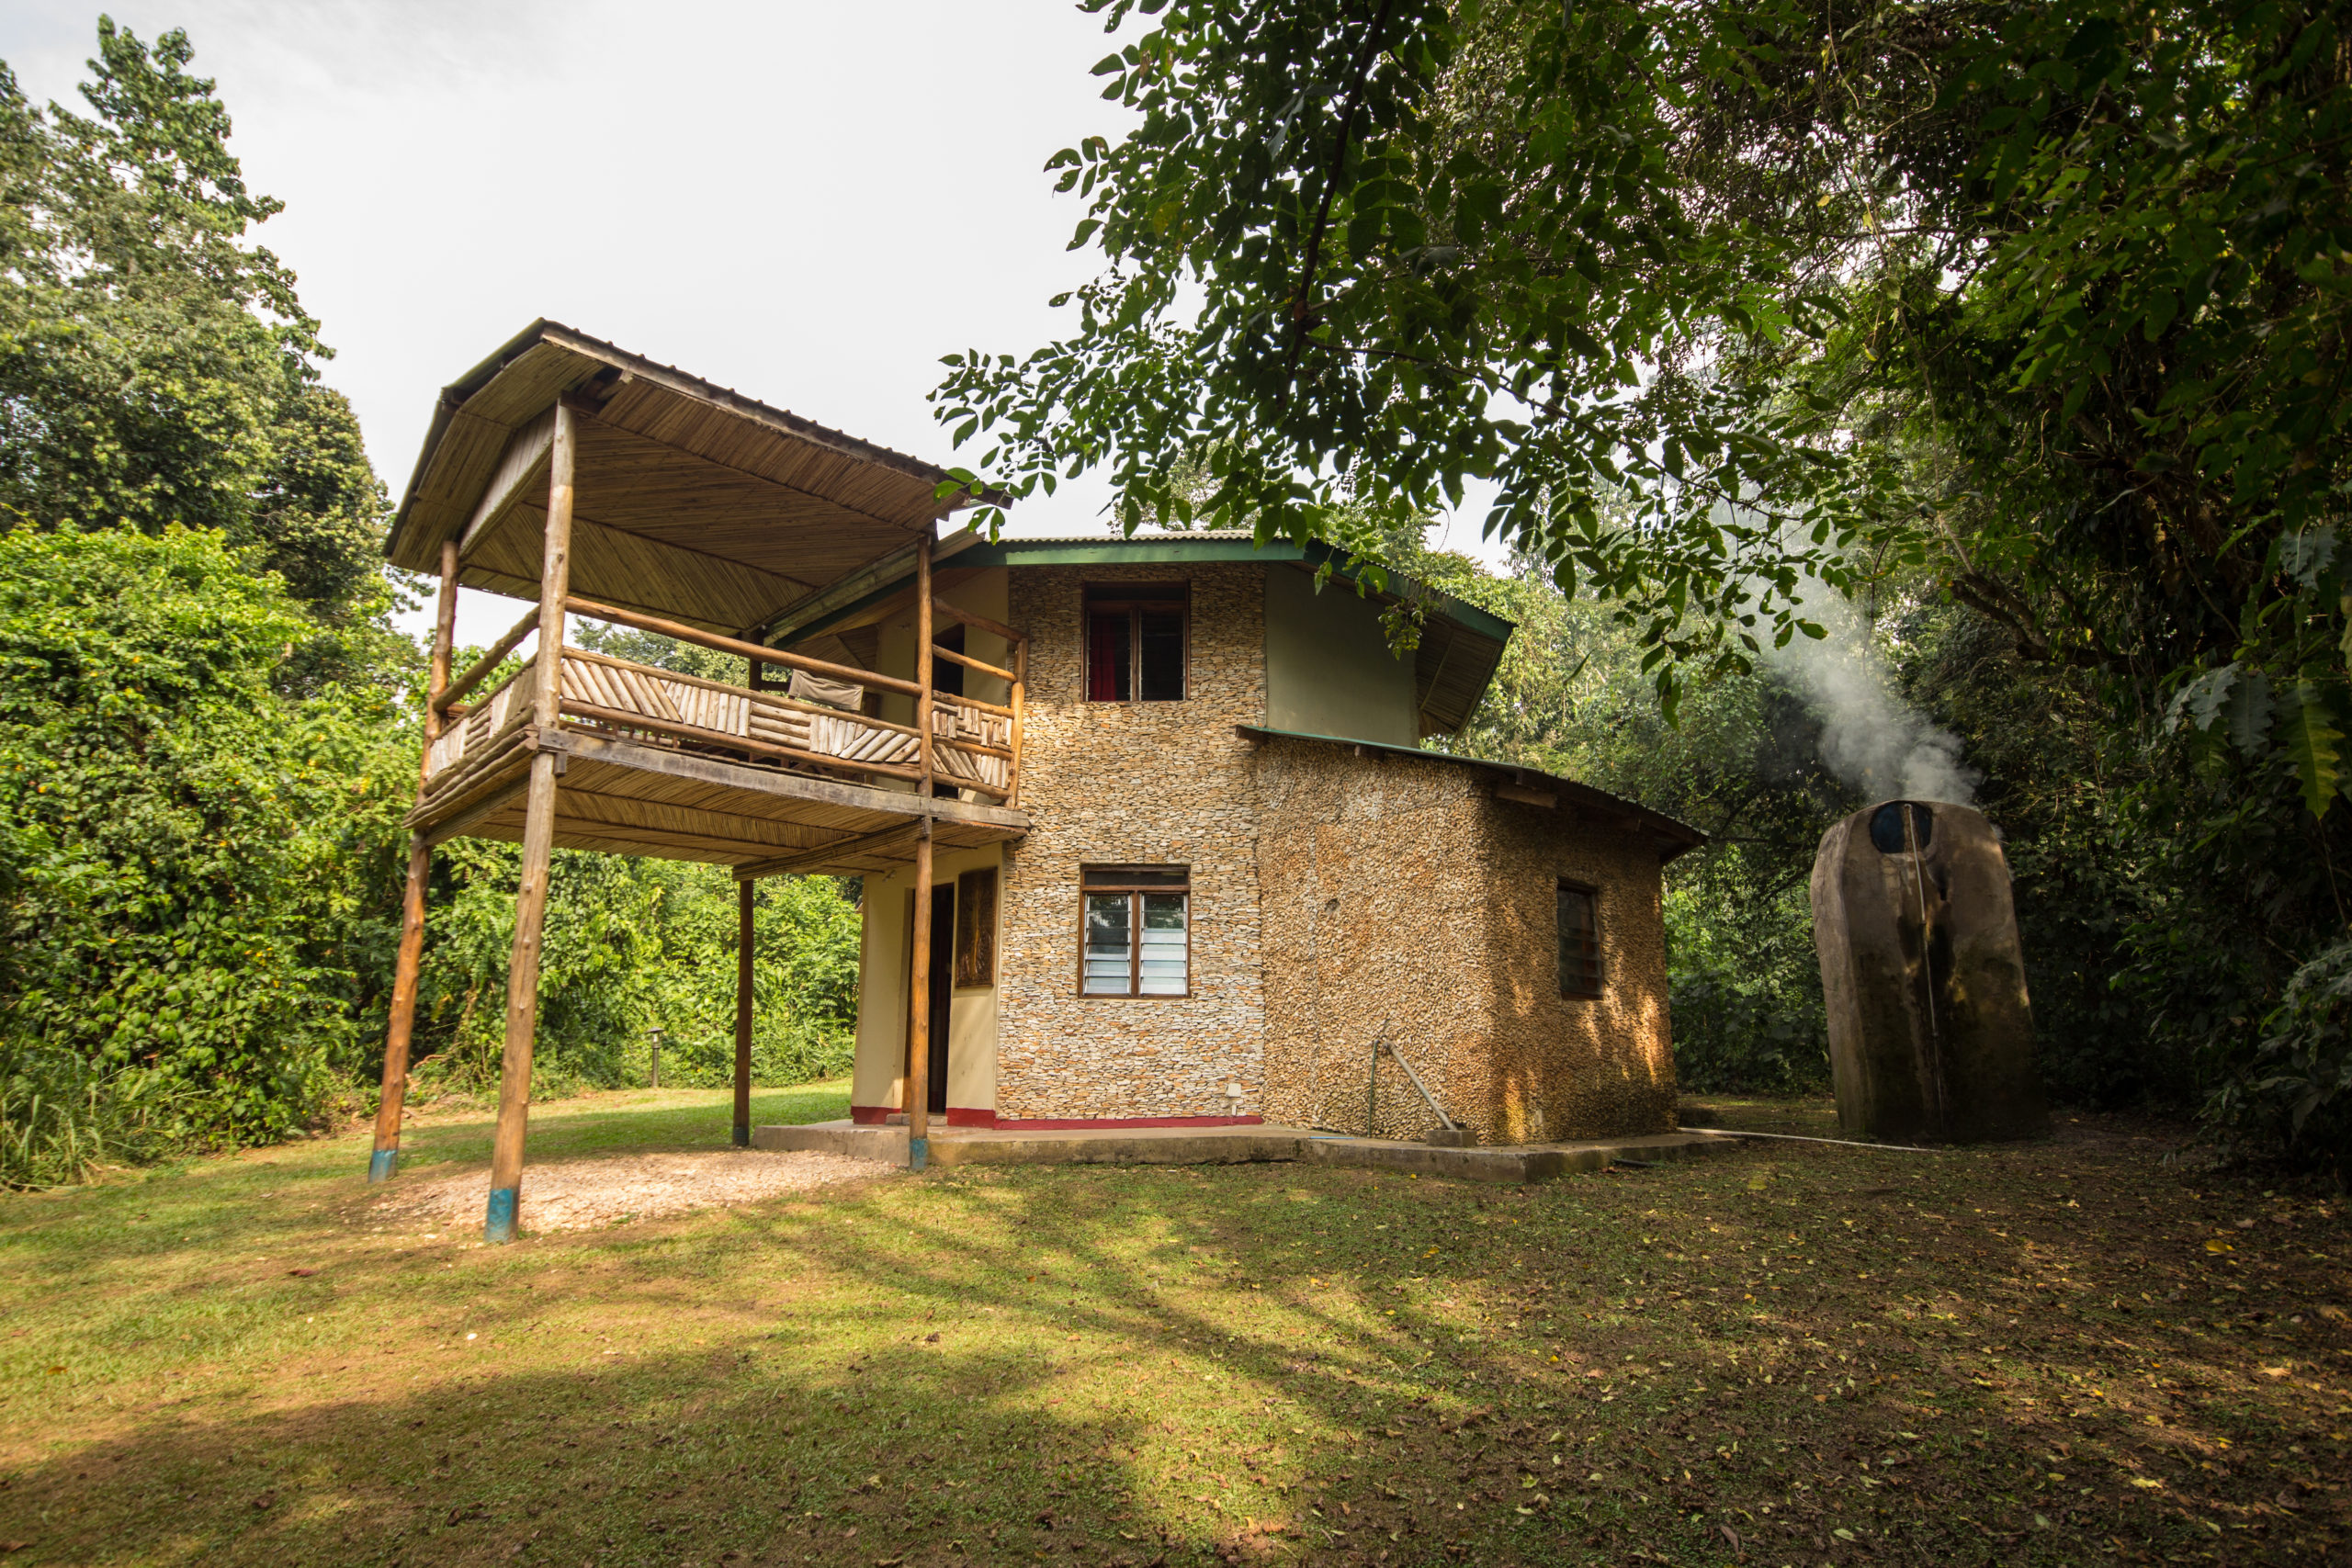 The luxury cottage at Primate Lodge in Uganda